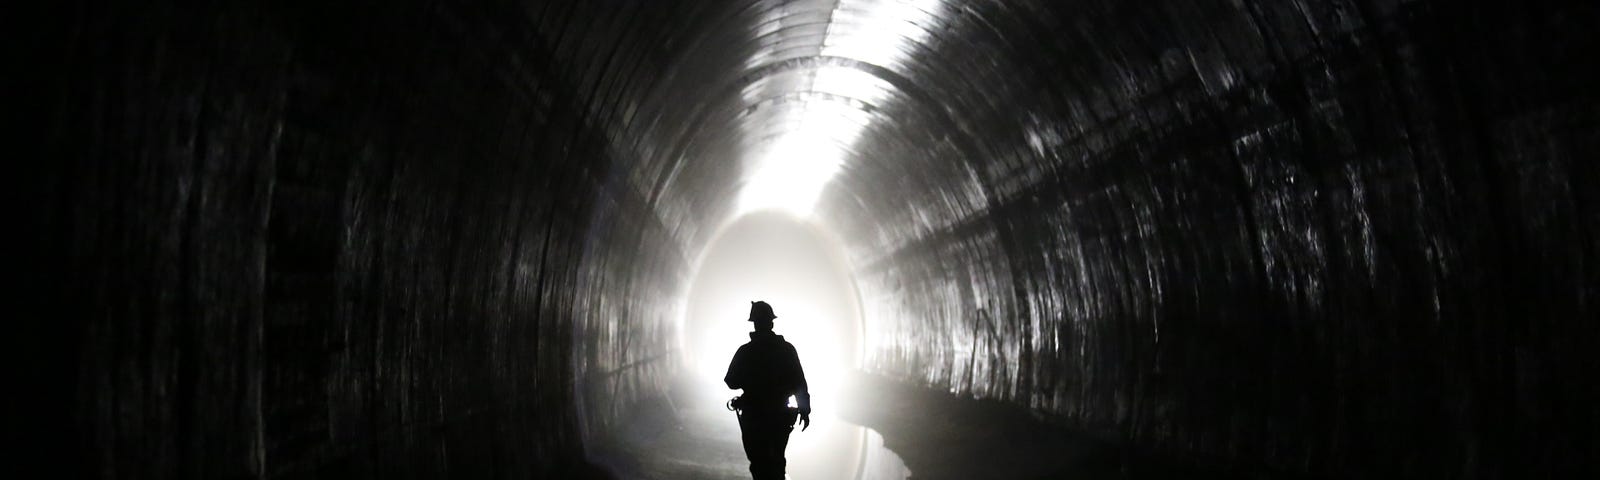 A worker walks in a tunnel towards the background.